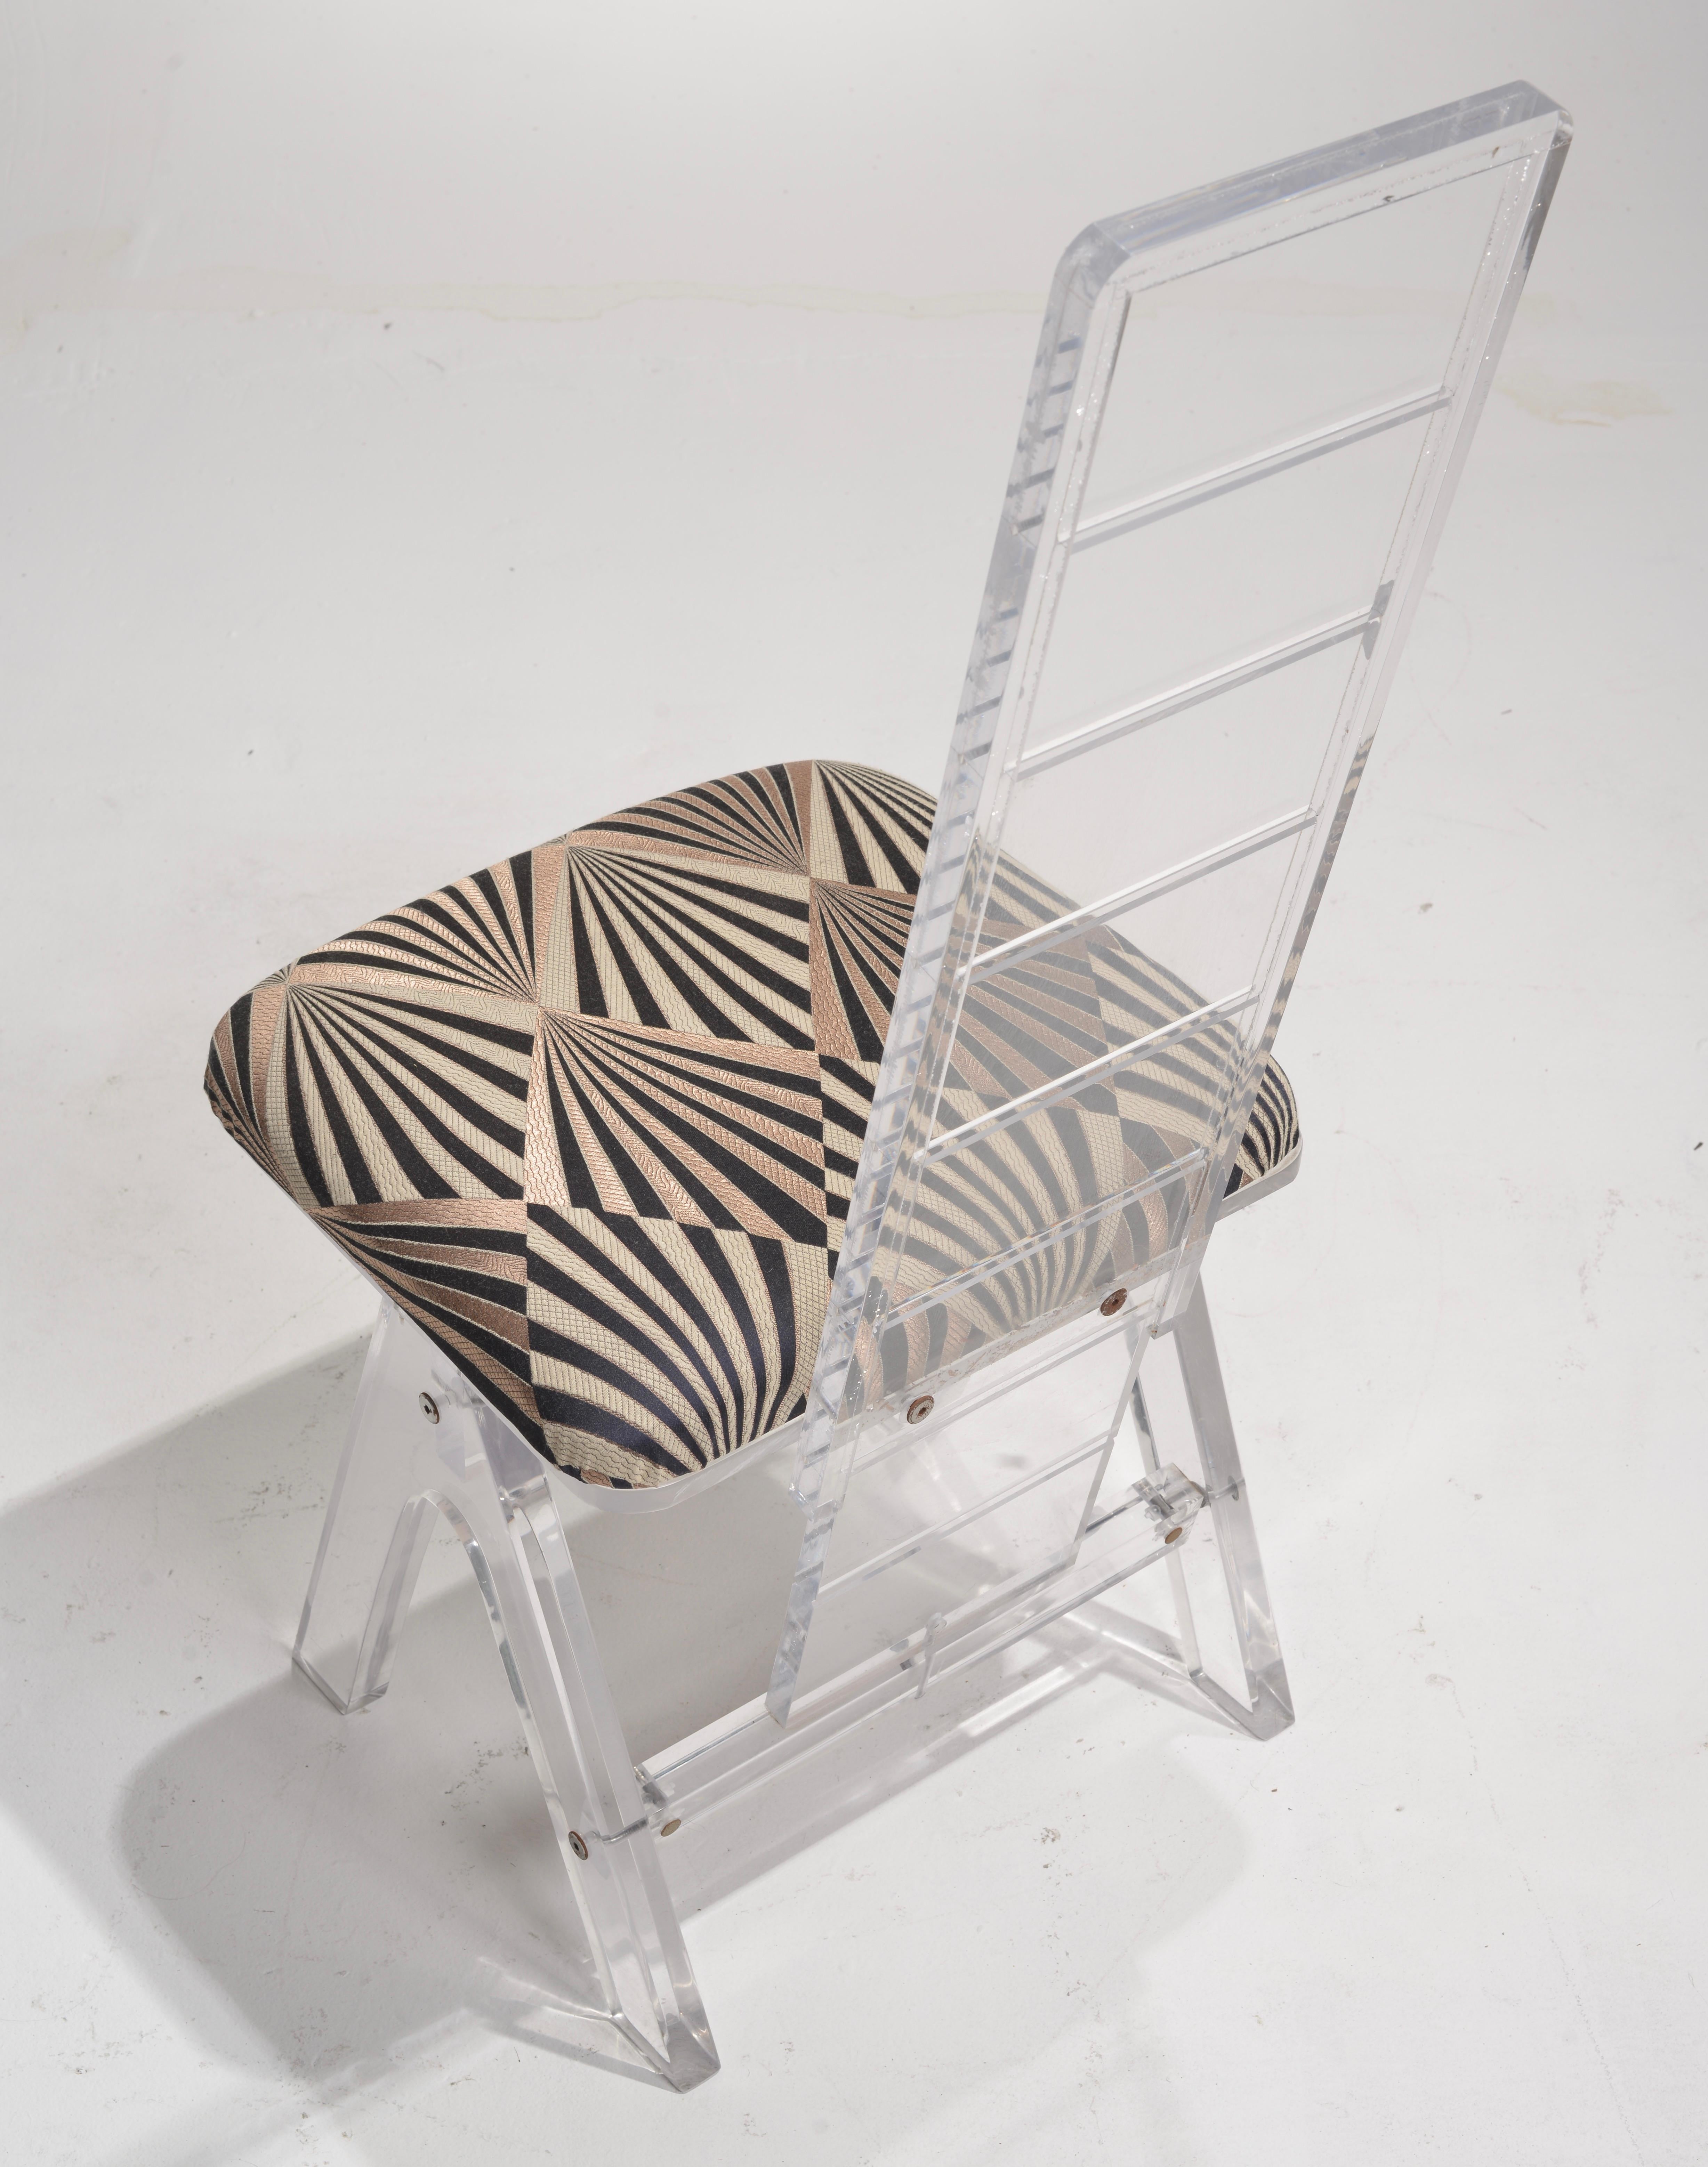 Set of 6 Lucite Chairs by Herb Rittz, c1970 For Sale 4